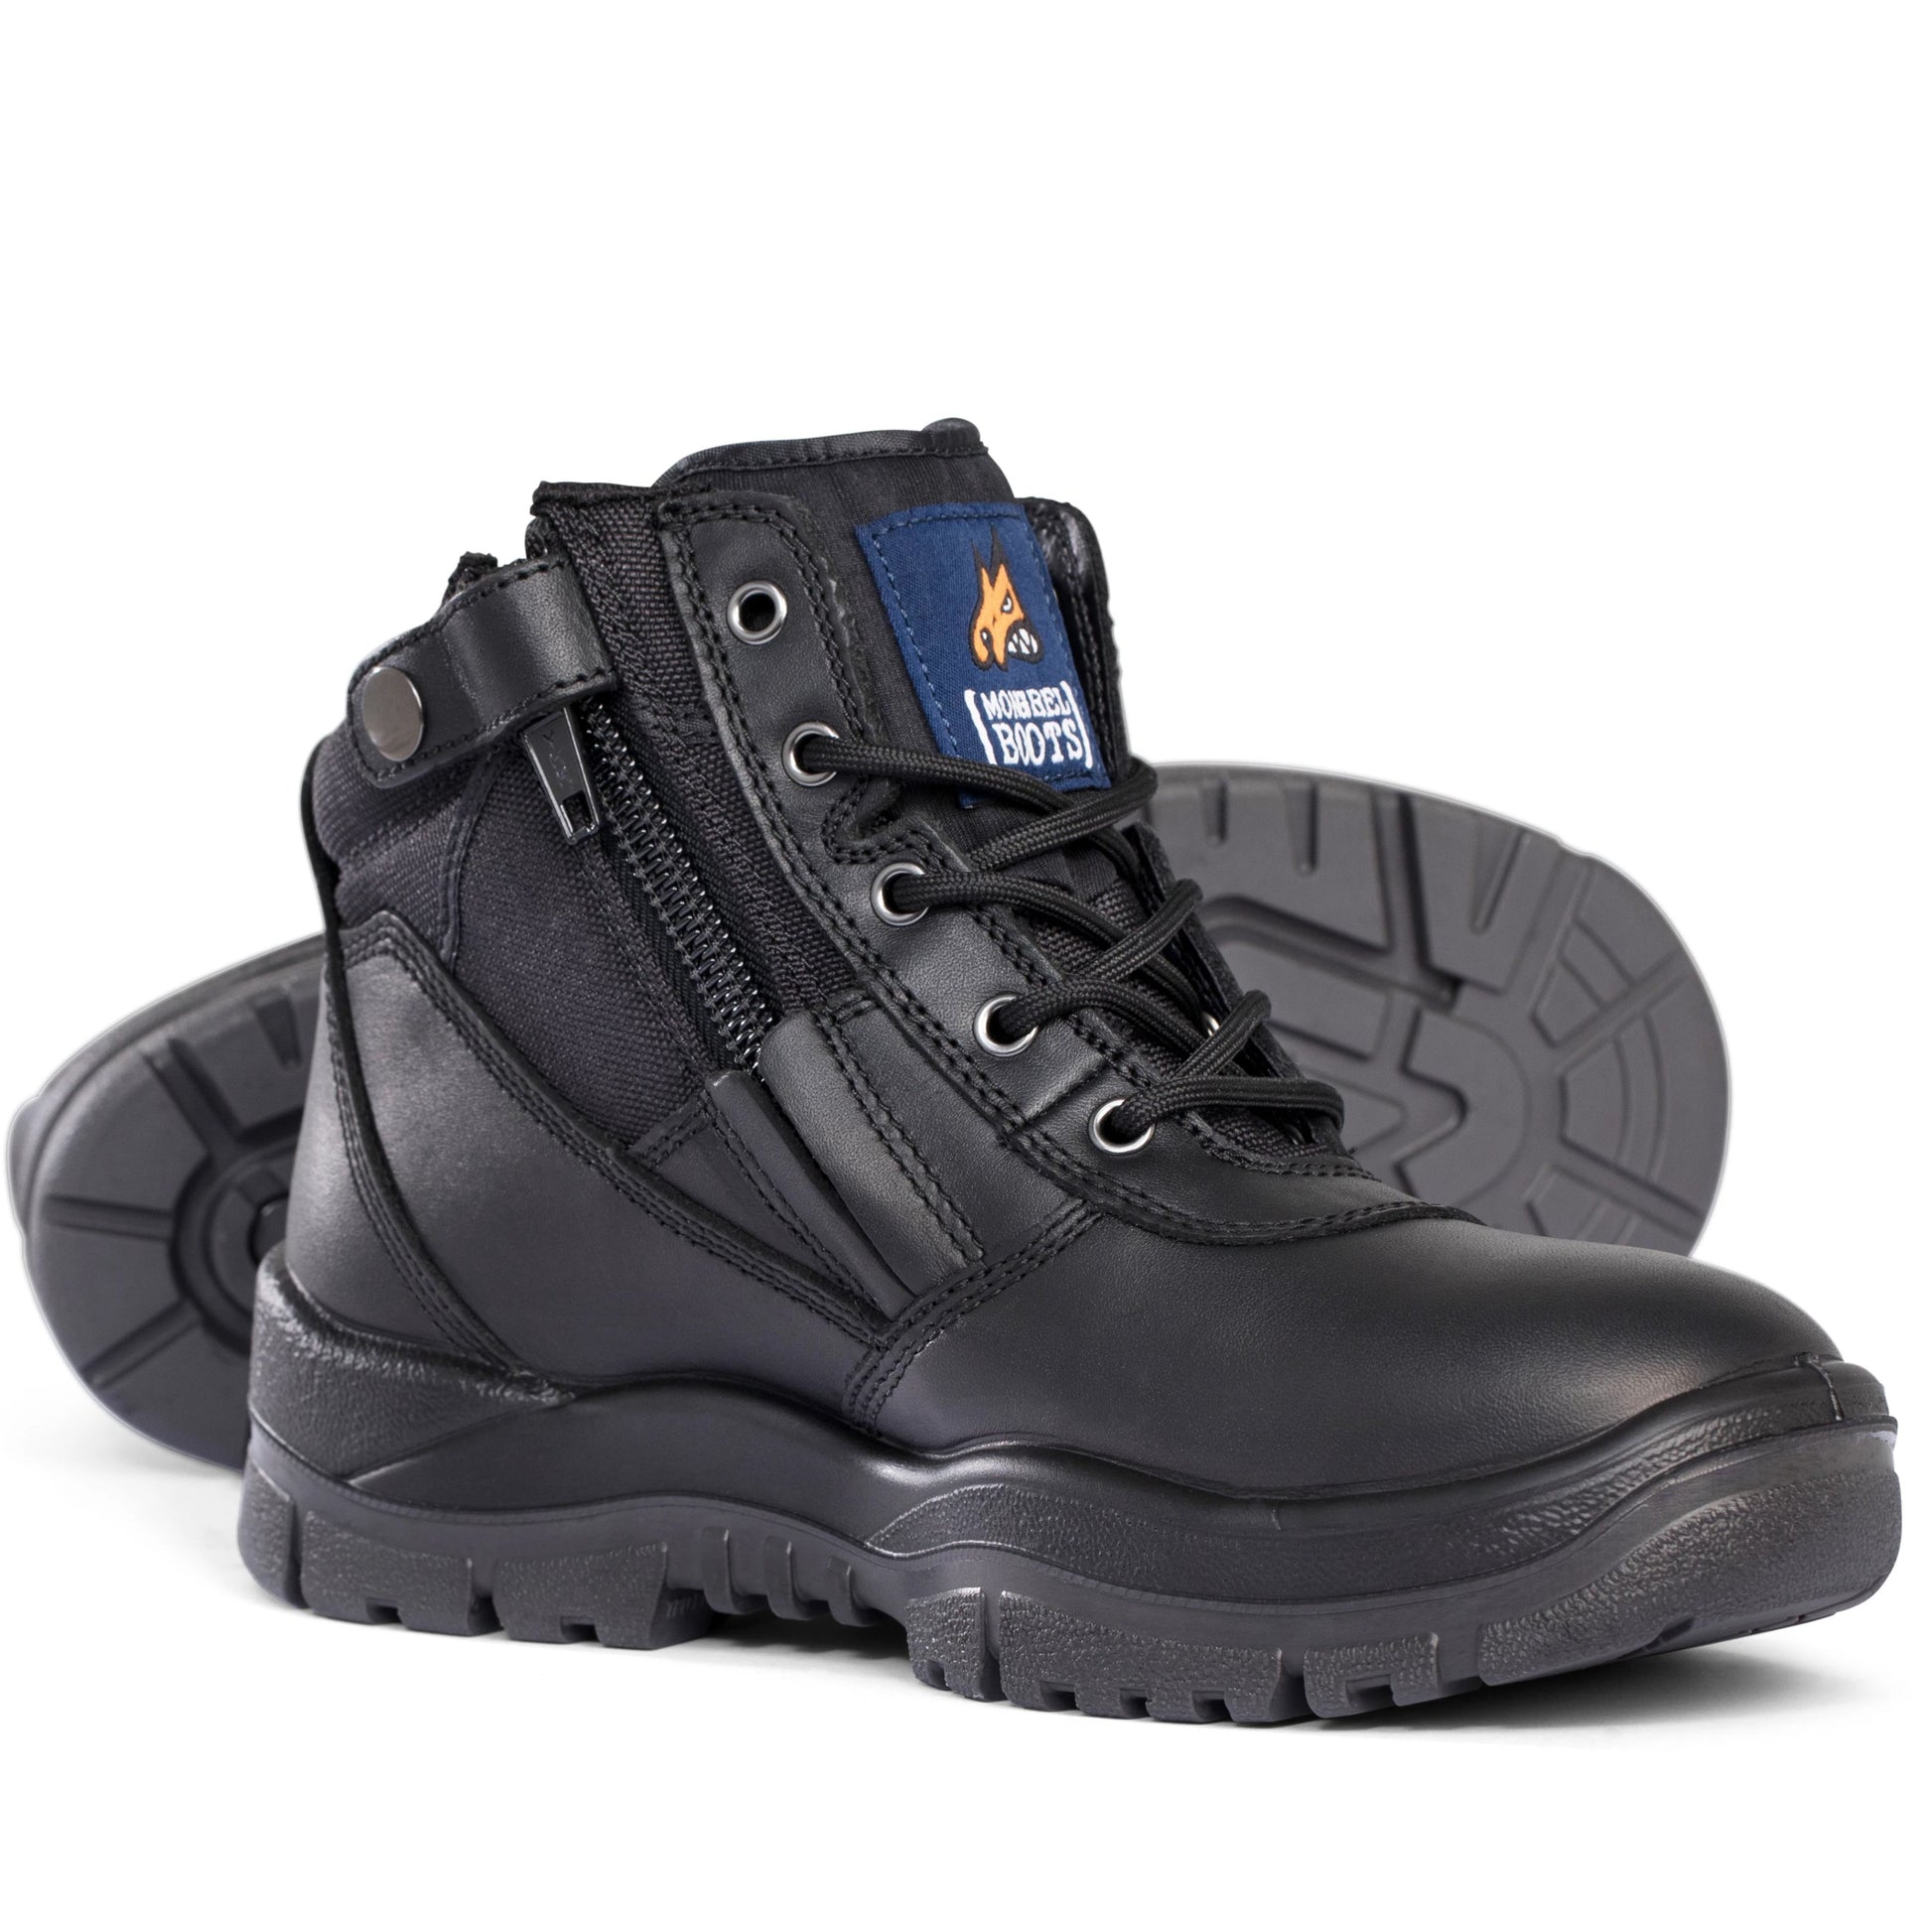 Mongrel - Black Low Lace Up Zip Sided Safety Boot